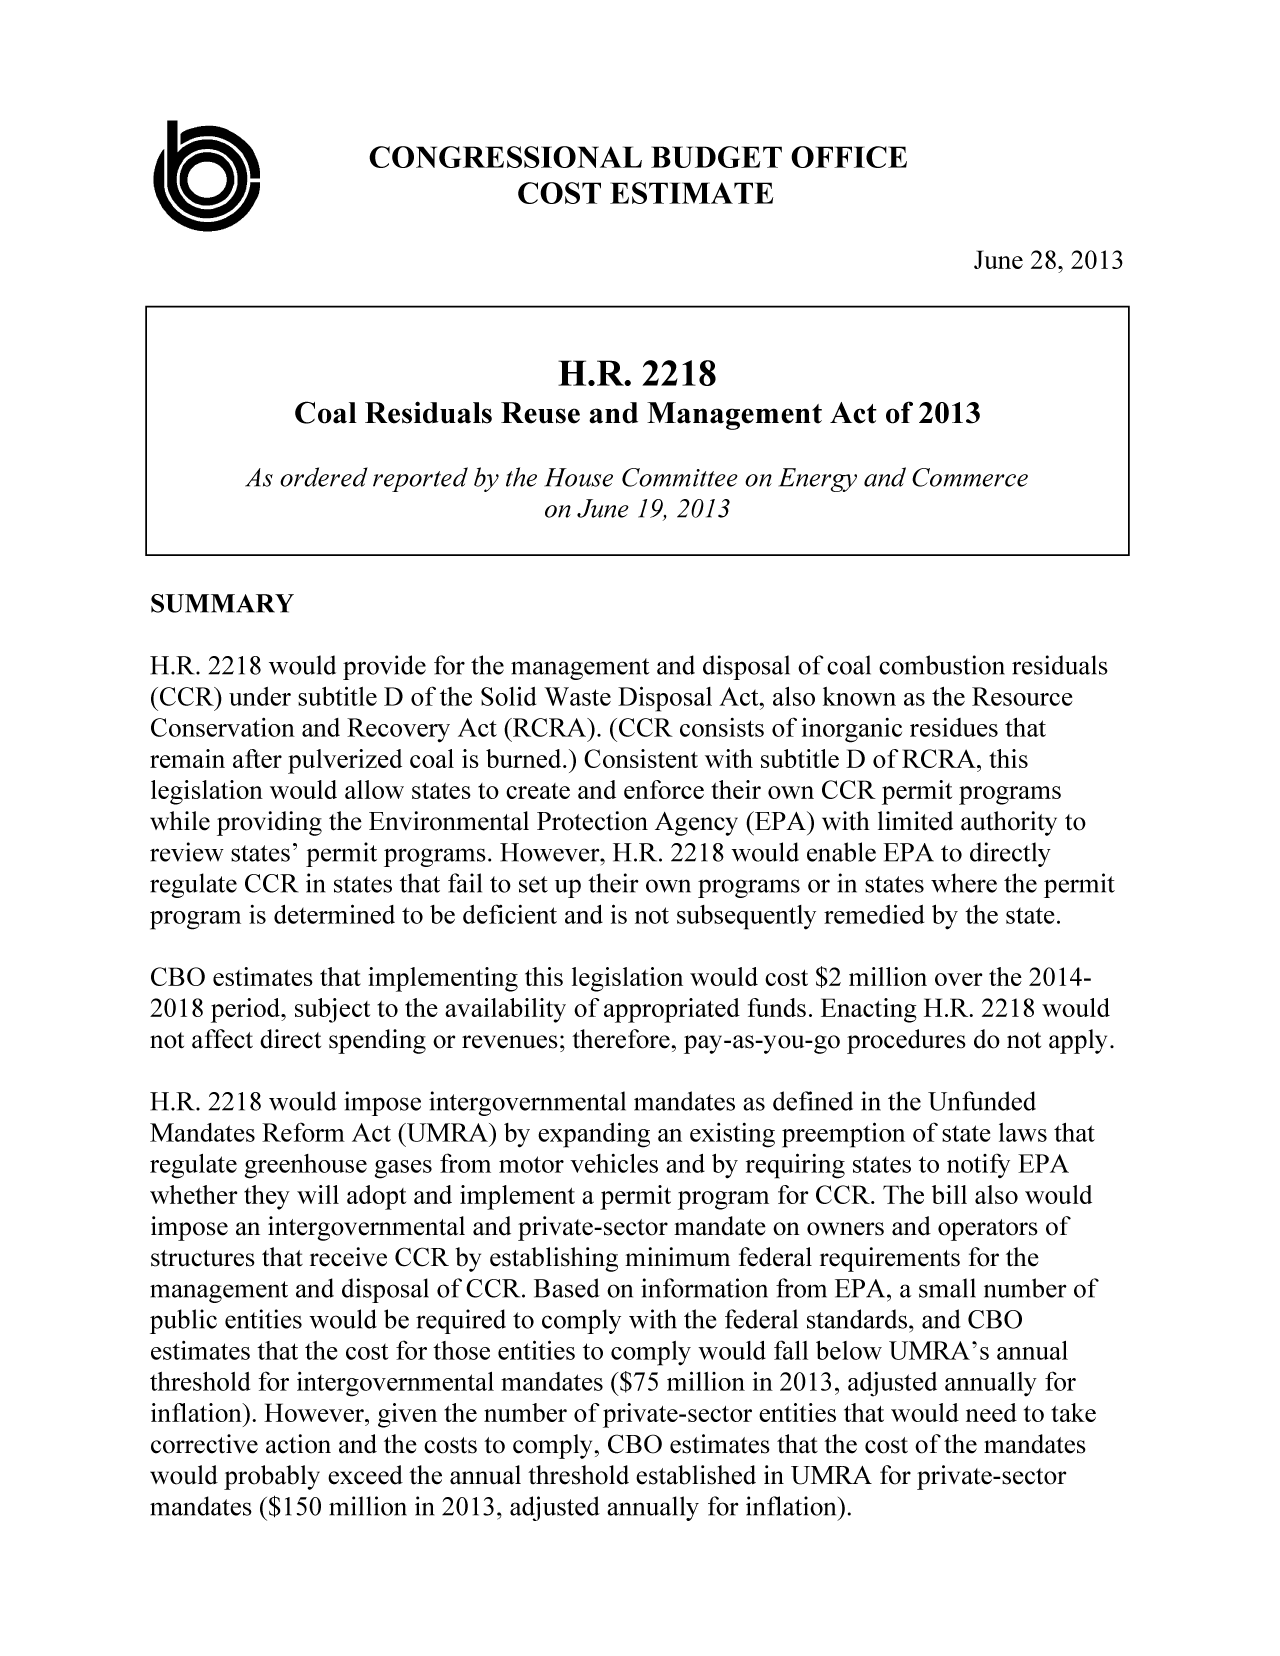 handle is hein.congrec/cbo11191 and id is 1 raw text is: CONGRESSIONAL BUDGET OFFICE
COST ESTIMATE
June 28, 2013
H.R. 2218
Coal Residuals Reuse and Management Act of 2013
As ordered reported by the House Committee on Energy and Commerce
on June 19, 2013
SUMMARY
H.R. 2218 would provide for the management and disposal of coal combustion residuals
(CCR) under subtitle D of the Solid Waste Disposal Act, also known as the Resource
Conservation and Recovery Act (RCRA). (CCR consists of inorganic residues that
remain after pulverized coal is burned.) Consistent with subtitle D of RCRA, this
legislation would allow states to create and enforce their own CCR permit programs
while providing the Environmental Protection Agency (EPA) with limited authority to
review states' permit programs. However, H.R. 2218 would enable EPA to directly
regulate CCR in states that fail to set up their own programs or in states where the permit
program is determined to be deficient and is not subsequently remedied by the state.
CBO estimates that implementing this legislation would cost $2 million over the 2014-
2018 period, subject to the availability of appropriated funds. Enacting H.R. 2218 would
not affect direct spending or revenues; therefore, pay-as-you-go procedures do not apply.
H.R. 2218 would impose intergovernmental mandates as defined in the Unfunded
Mandates Reform Act (UMRA) by expanding an existing preemption of state laws that
regulate greenhouse gases from motor vehicles and by requiring states to notify EPA
whether they will adopt and implement a permit program for CCR. The bill also would
impose an intergovernmental and private-sector mandate on owners and operators of
structures that receive CCR by establishing minimum federal requirements for the
management and disposal of CCR. Based on information from EPA, a small number of
public entities would be required to comply with the federal standards, and CBO
estimates that the cost for those entities to comply would fall below UMRA's annual
threshold for intergovernmental mandates ($75 million in 2013, adjusted annually for
inflation). However, given the number of private-sector entities that would need to take
corrective action and the costs to comply, CBO estimates that the cost of the mandates
would probably exceed the annual threshold established in UMRA for private-sector
mandates ($150 million in 2013, adjusted annually for inflation).


